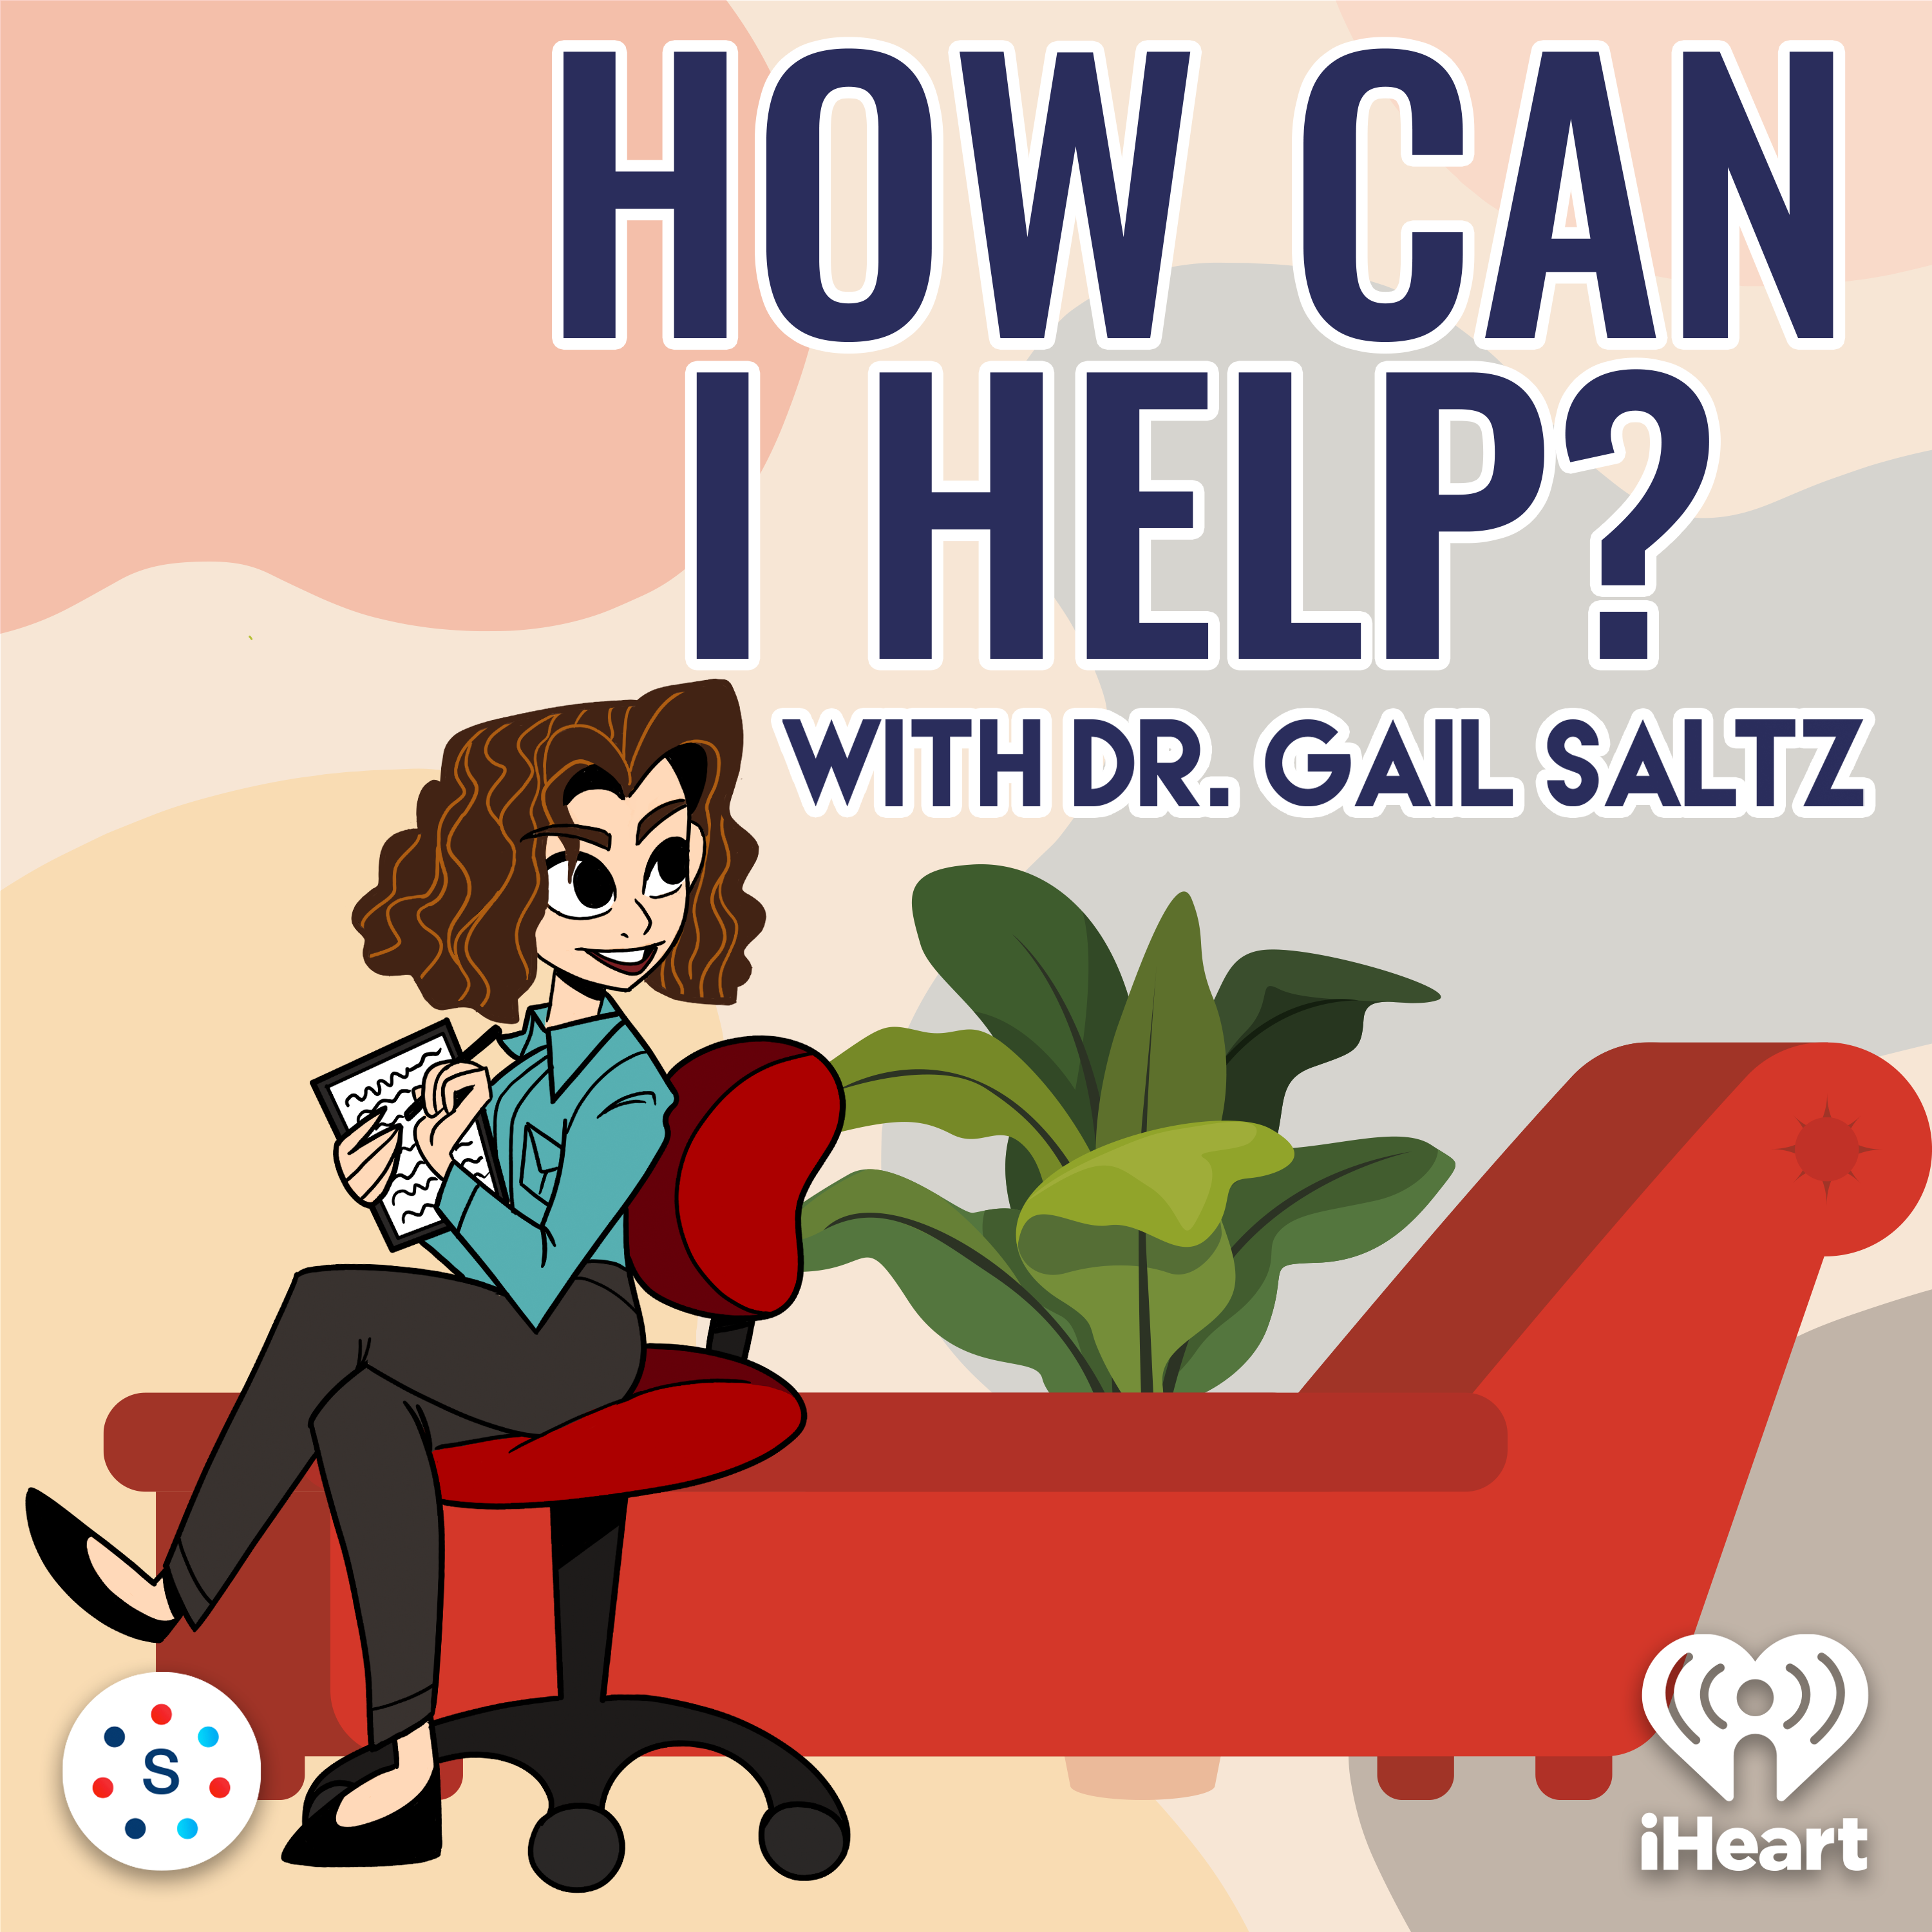 How Can I Help? -- with Dr. Gail Saltz starts January 22nd